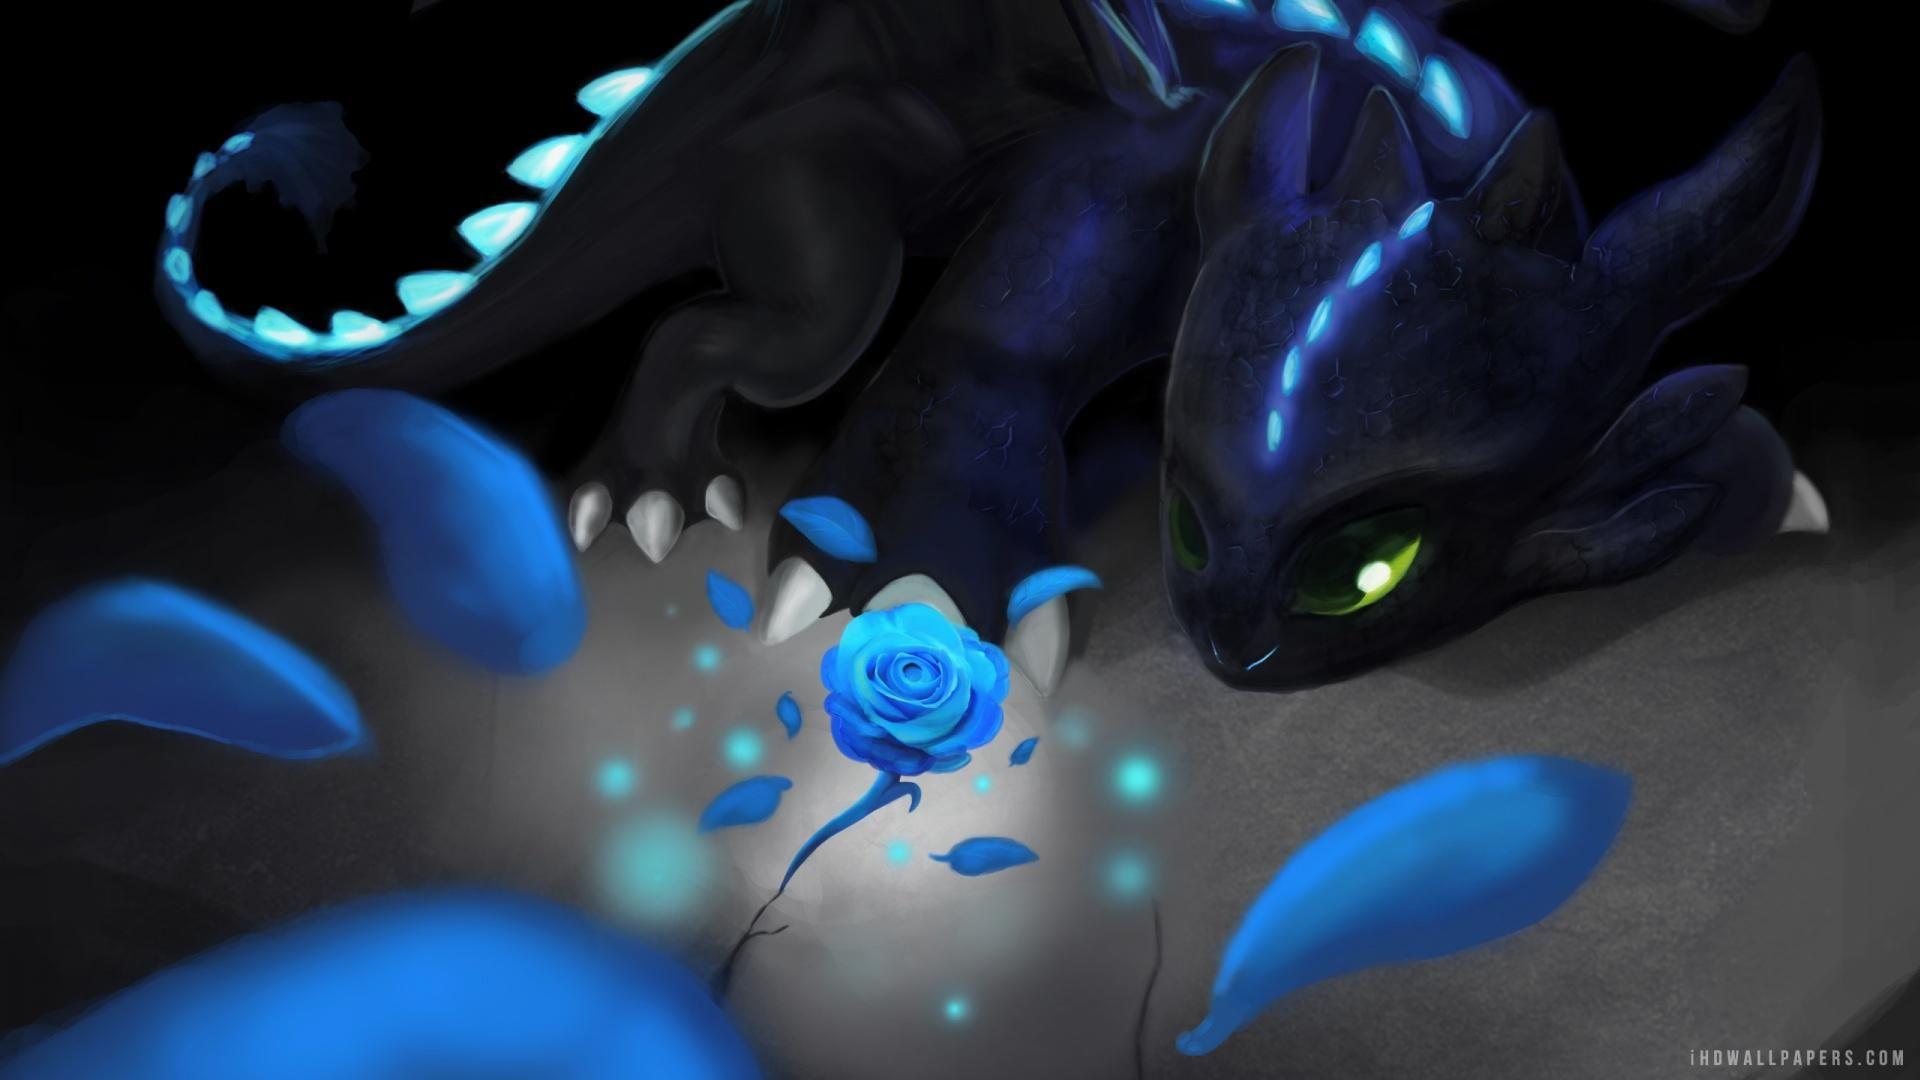 Toothless Dragon Wallpaper, Picture